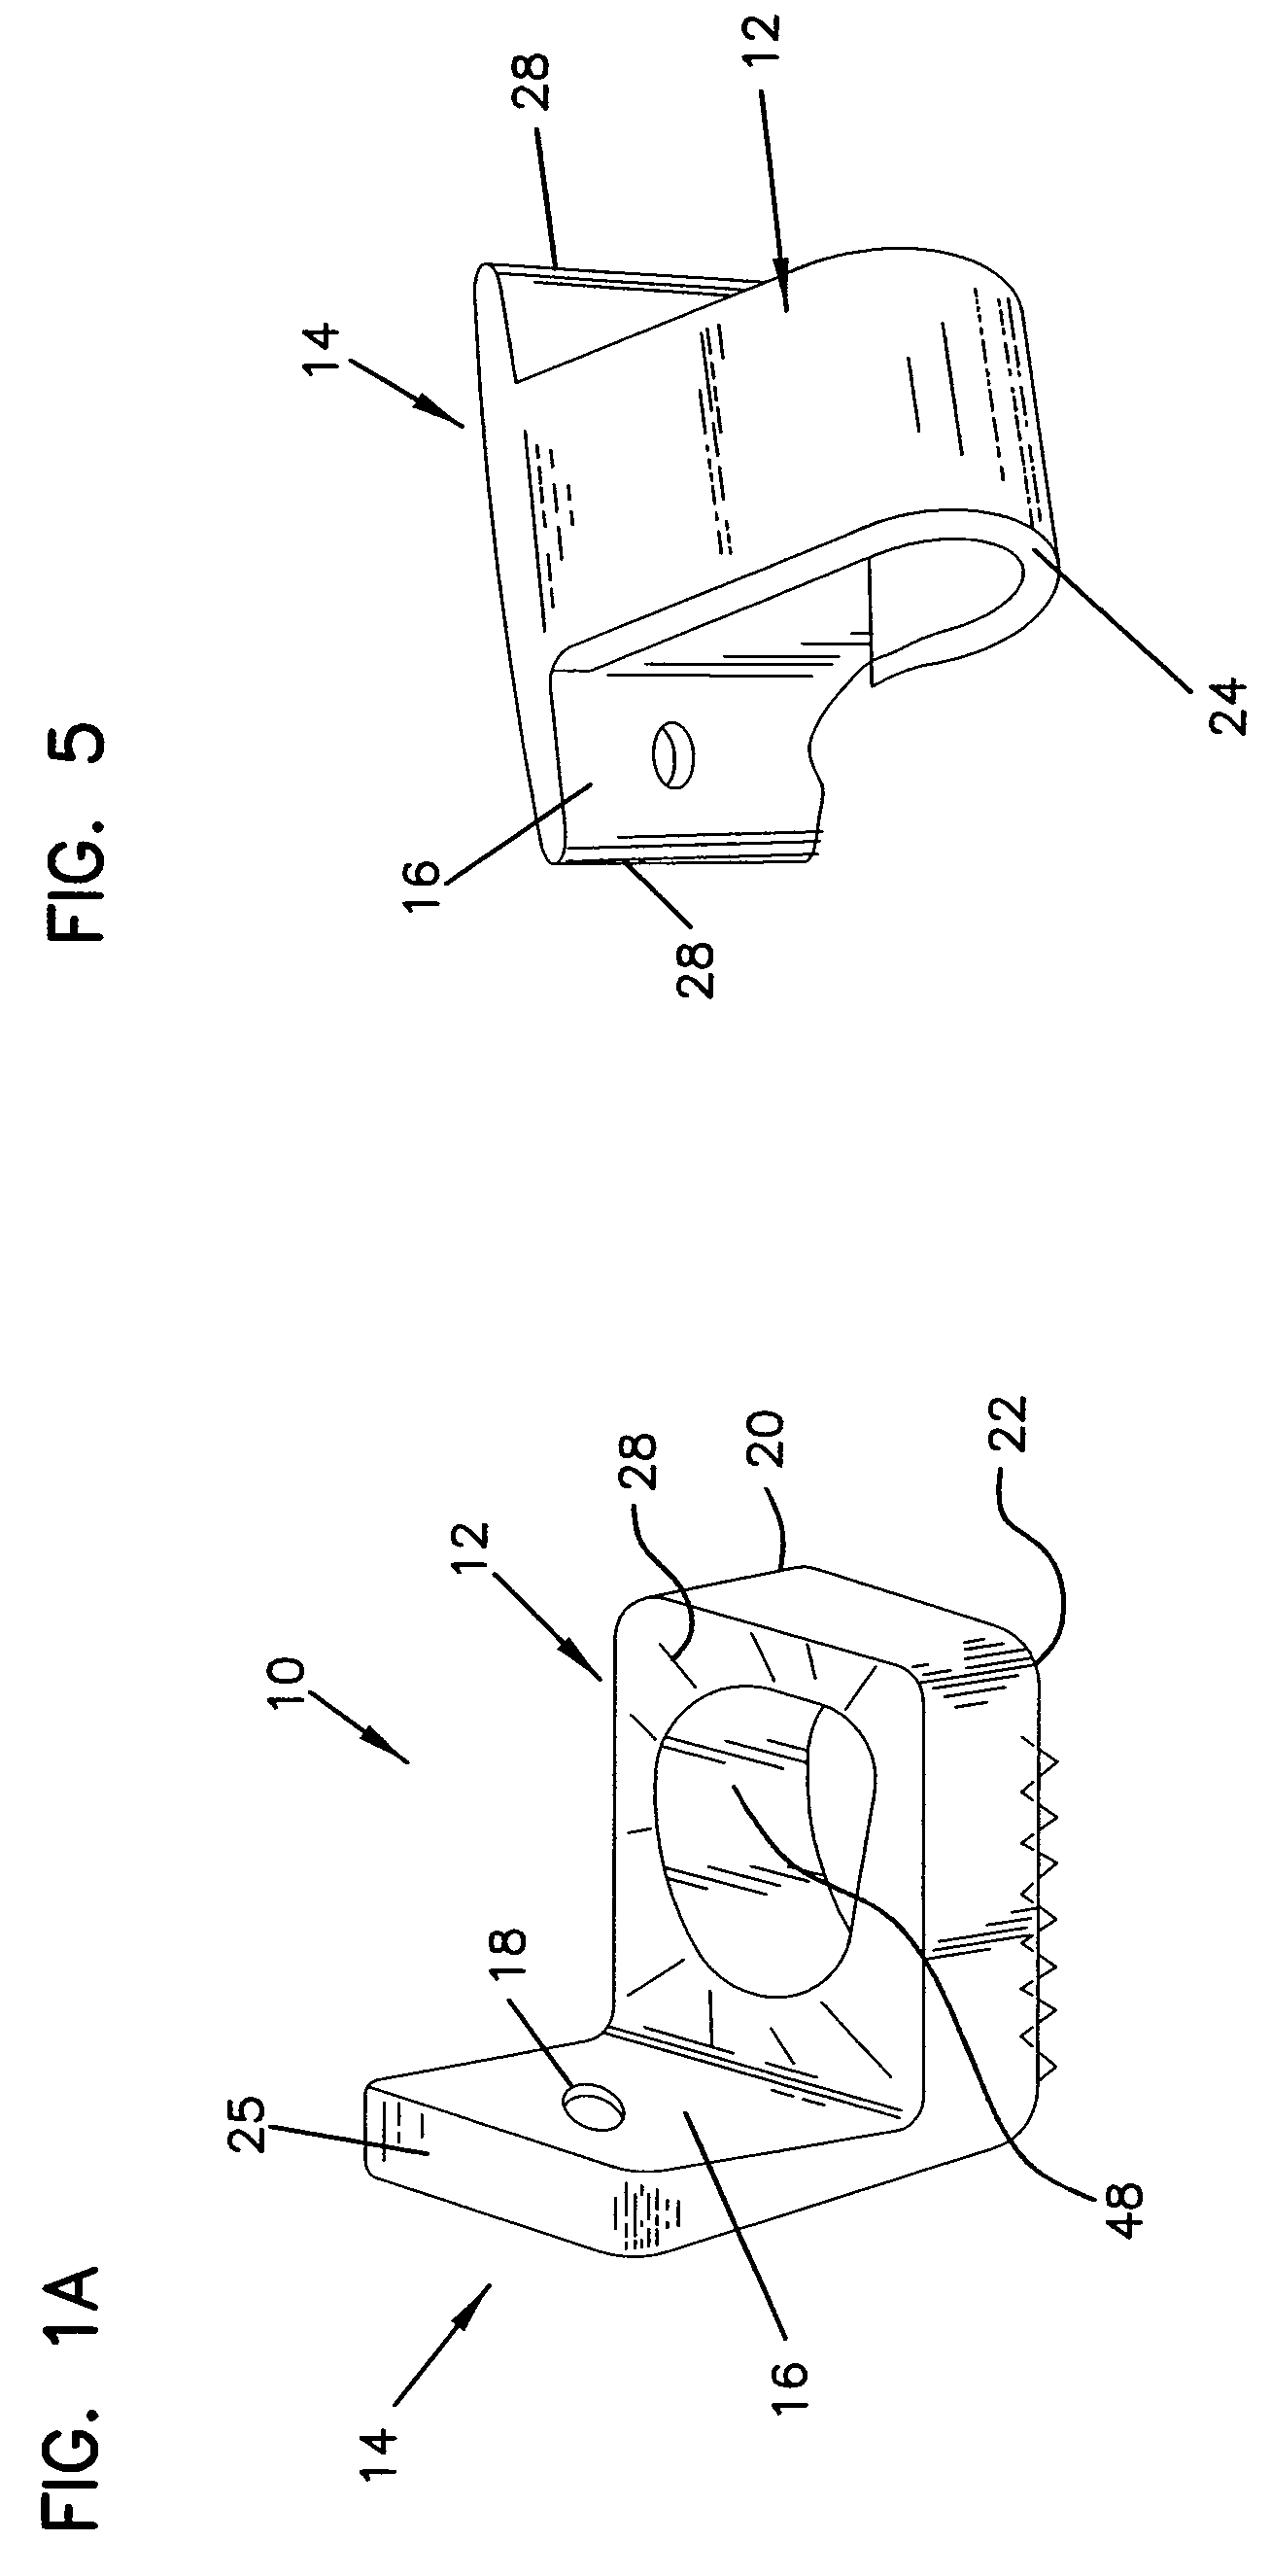 Intervertebral implant with movement resistant structure